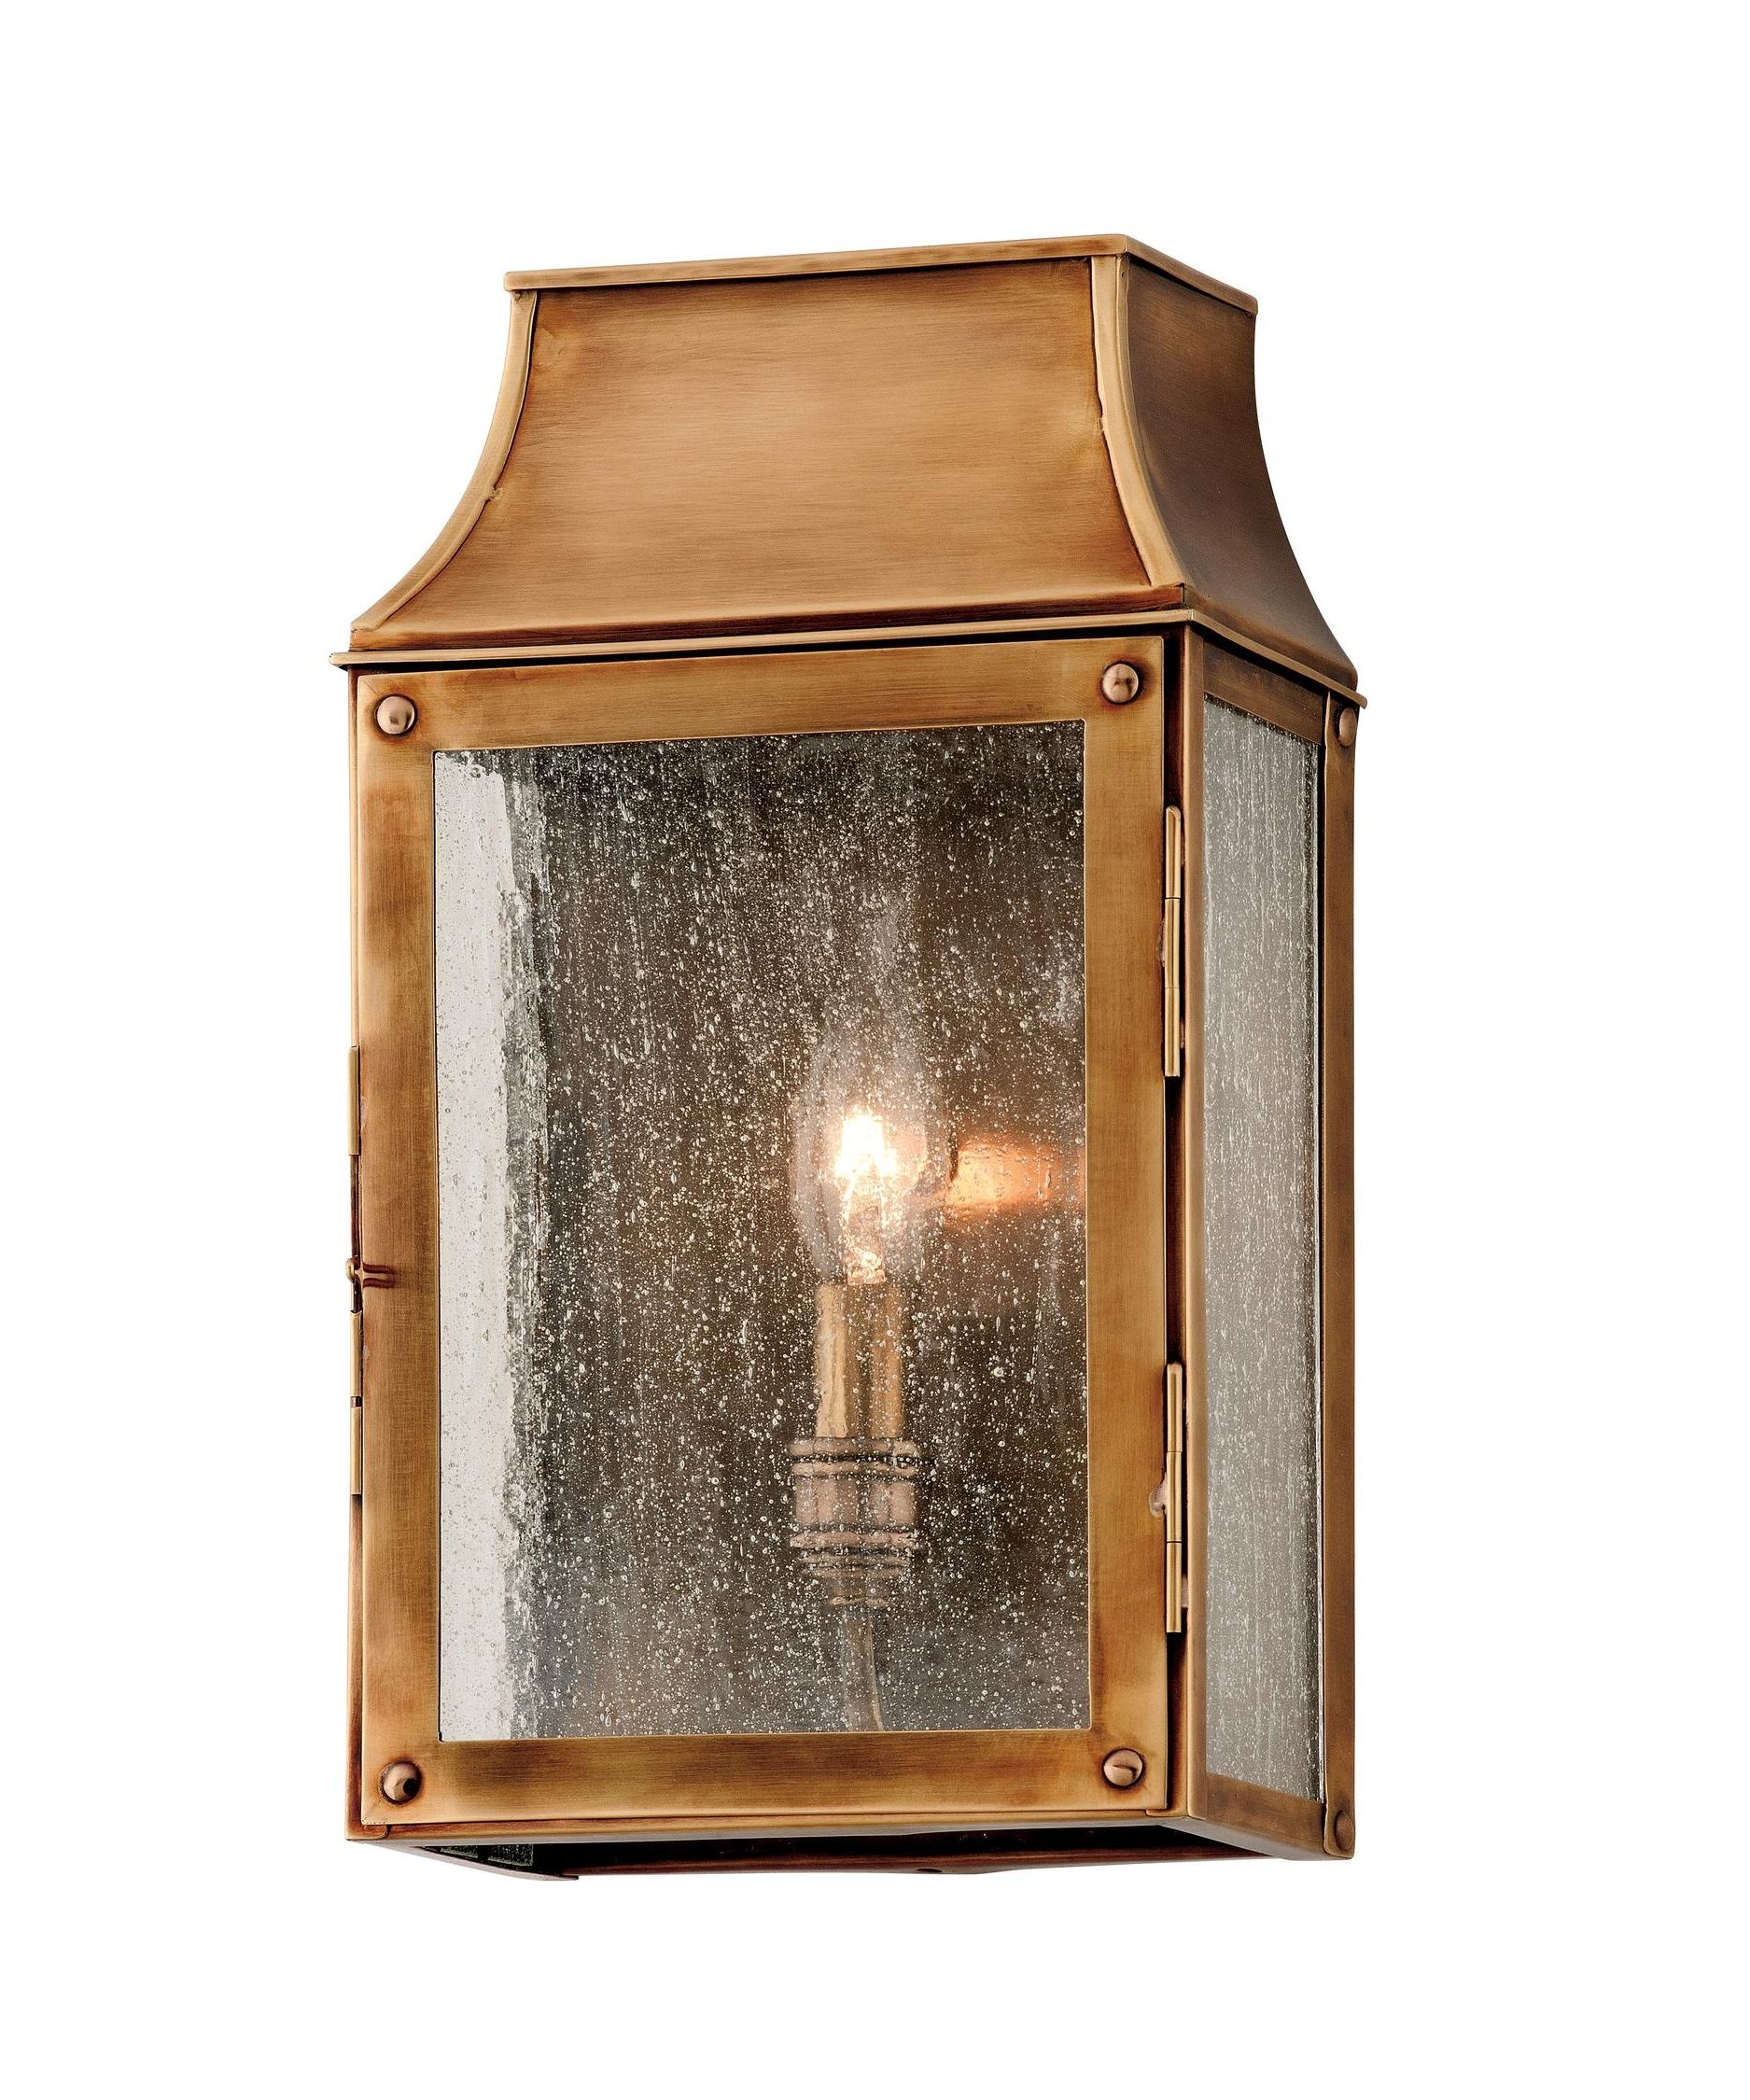 Beacon Outdoor Wall Lighting With Regard To Most Up To Date Troy Lighting B3421 Beacon Hill 7 Inch Wide 1 Light Outdoor Wall (View 1 of 20)